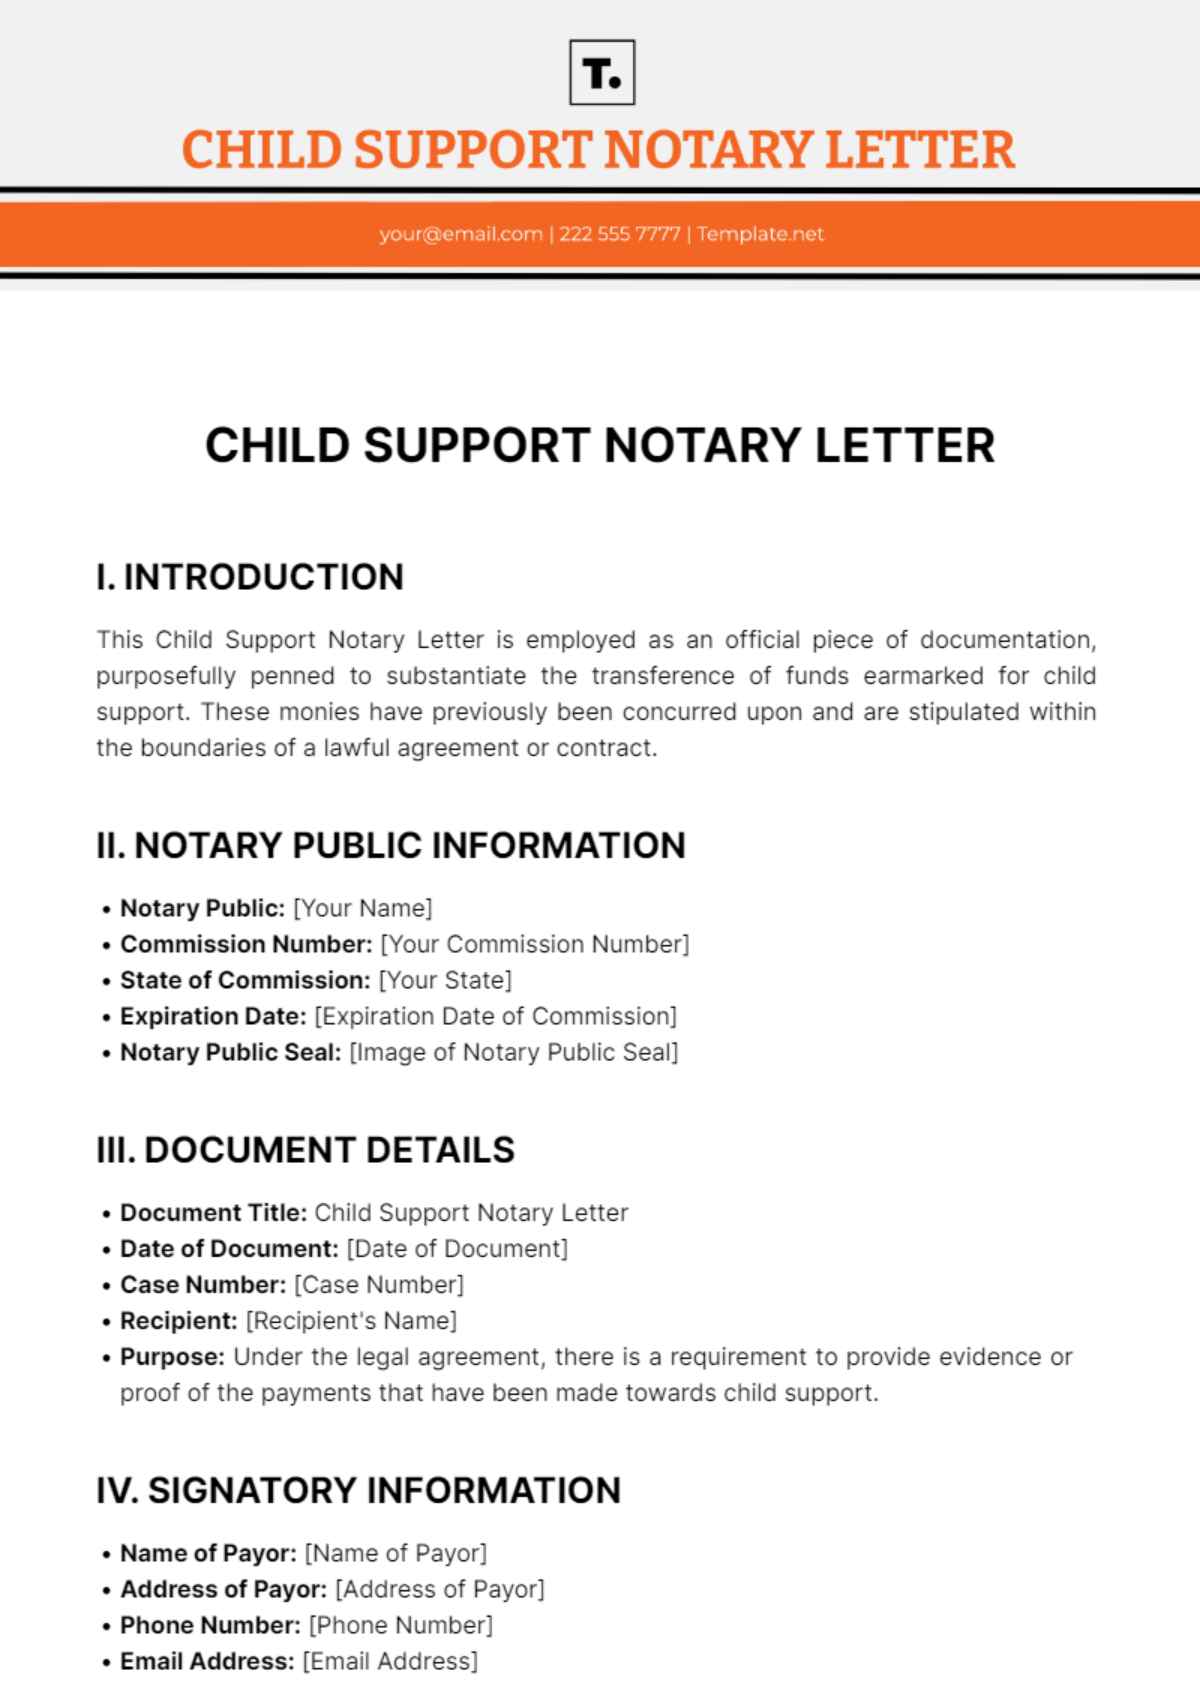 Free Child Support Notary Letter Template